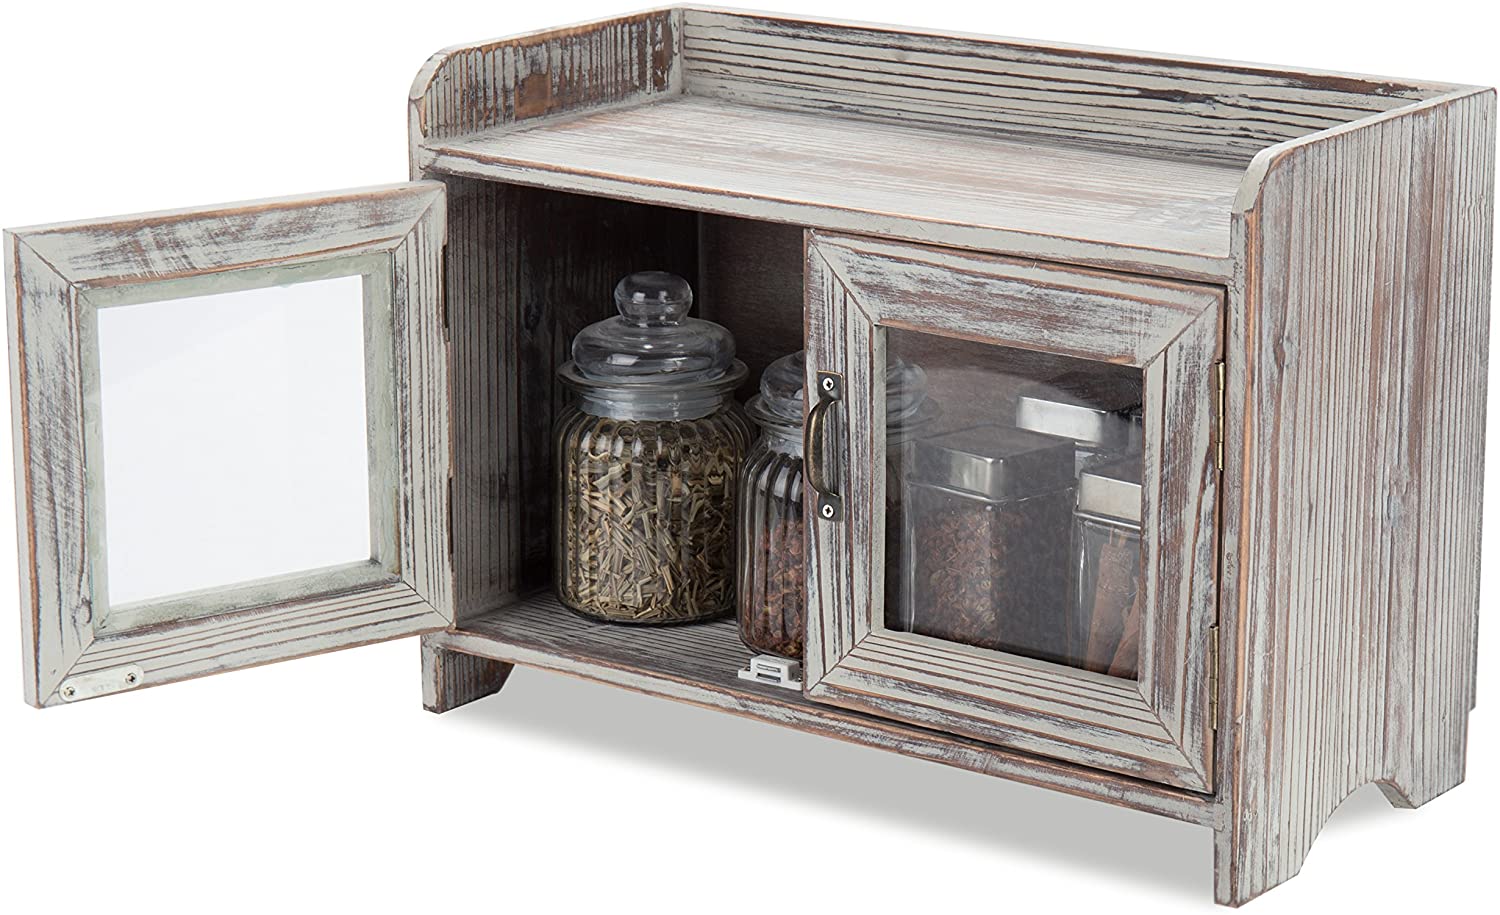 MyGift Countertop Torched-Wood Storage Cabinet